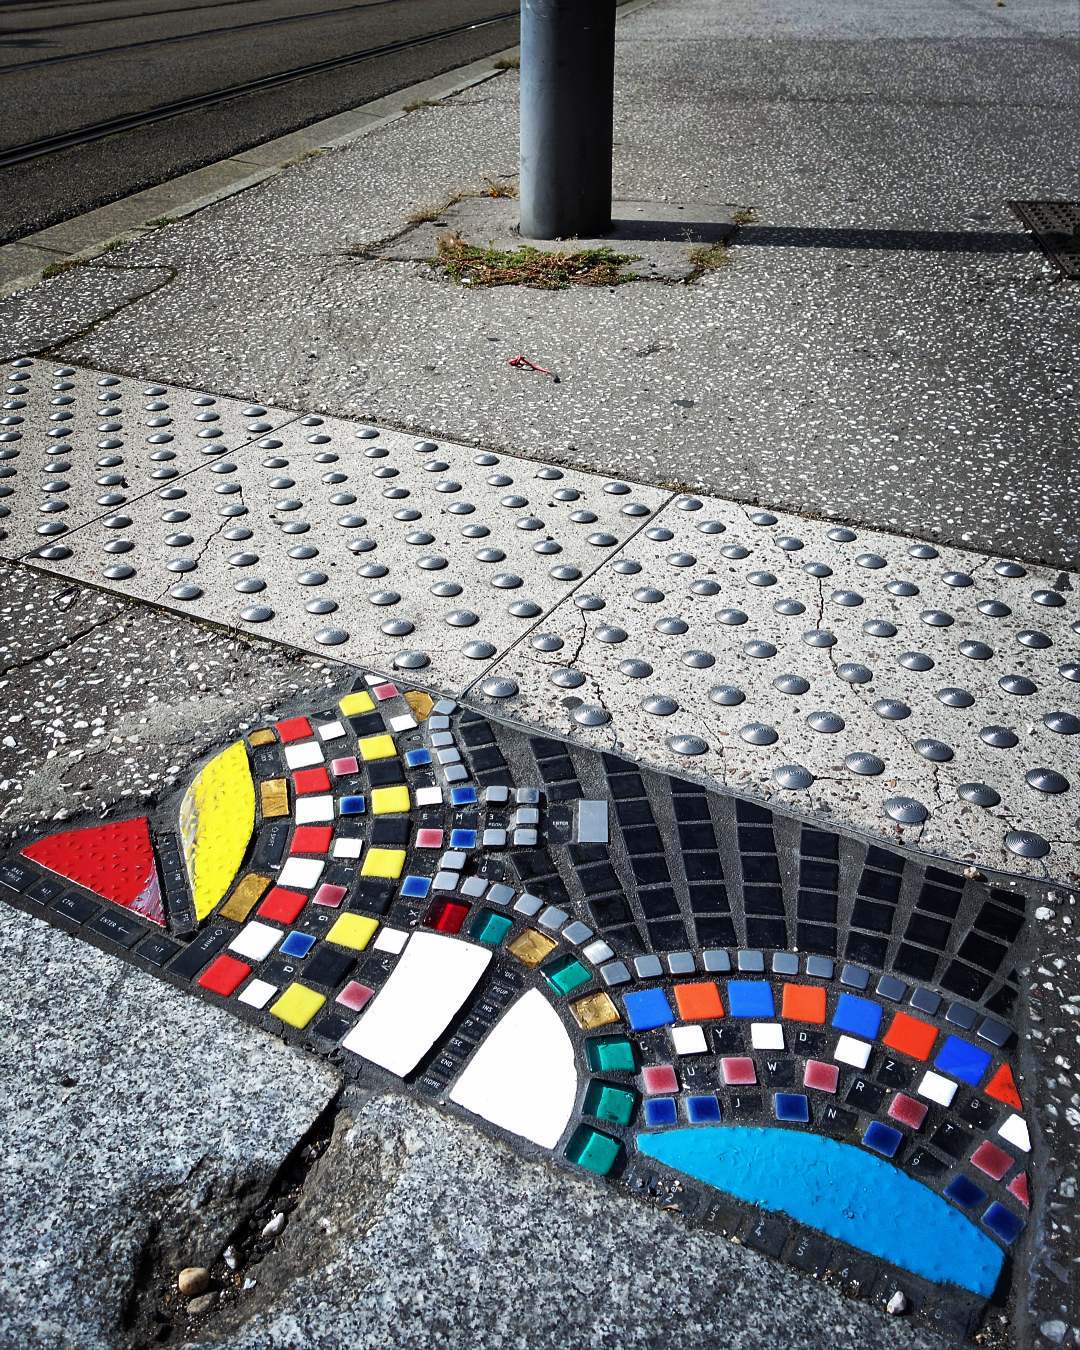 Fractured Sidewalks Pavements And Walls Repaired With Vibrant Tiled Mosaics By Ememem 18